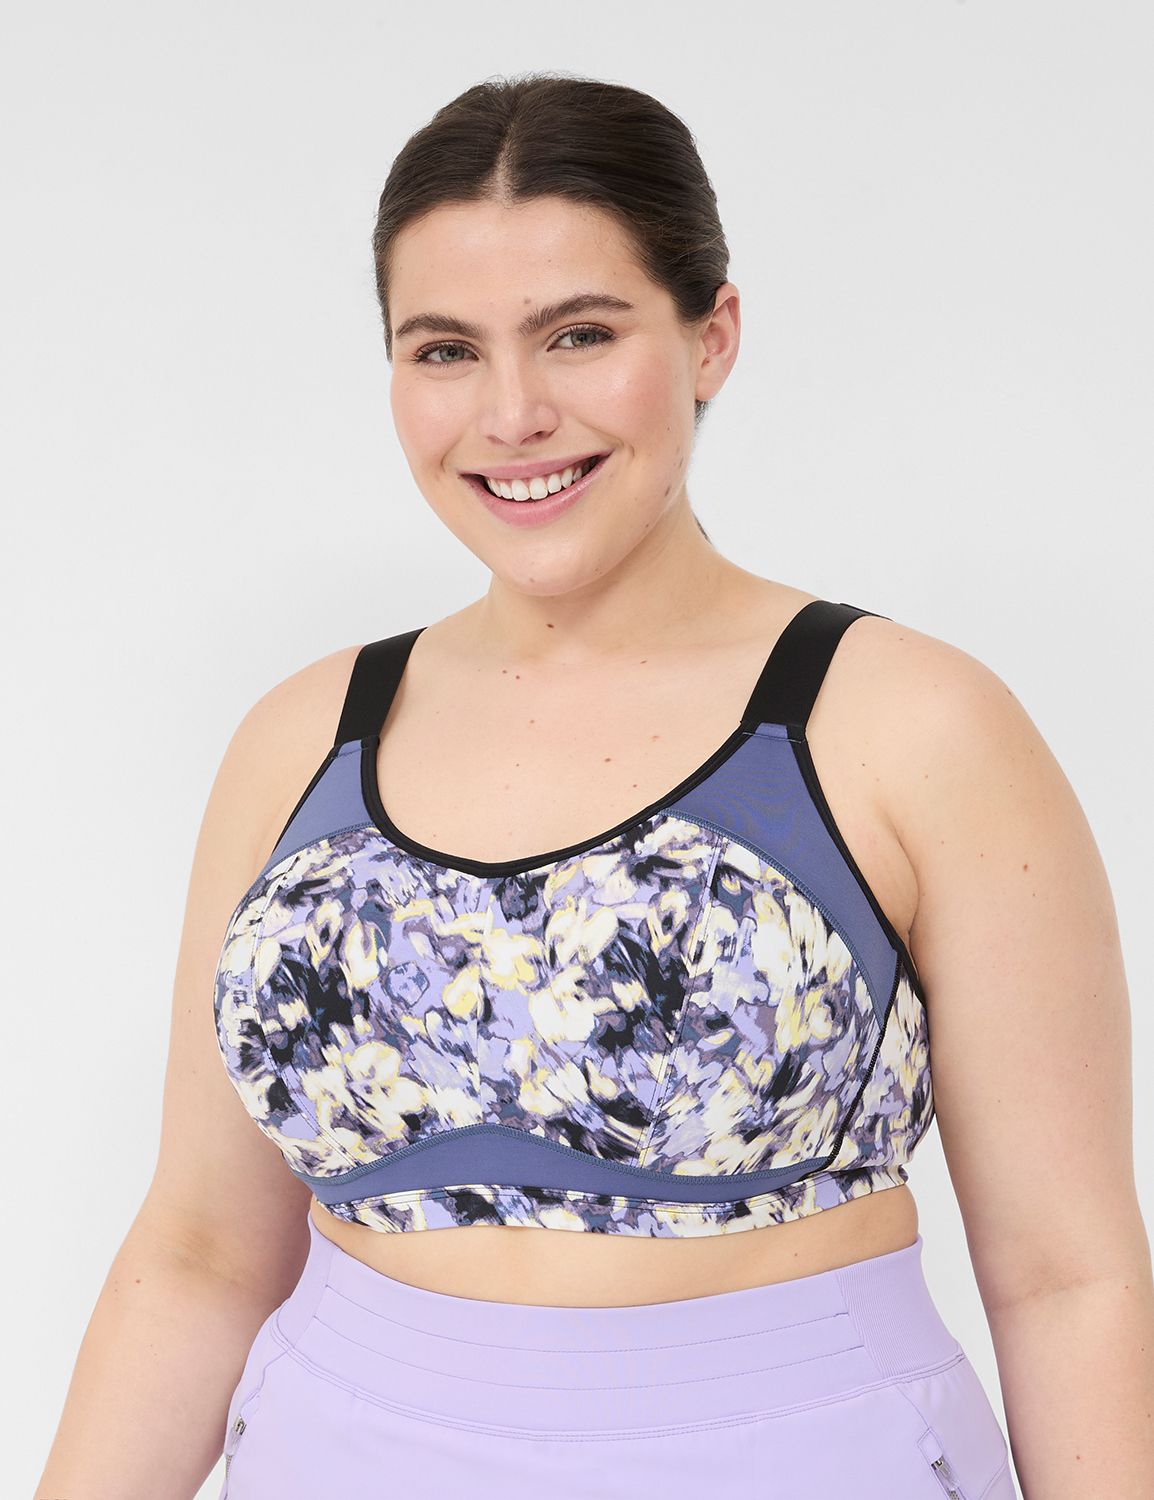 High Strength Cross Back Yoga Livi Active Bra For Women Shockproof, Sexy,  And Comfortable Gymwear From Clothes182, $7.54